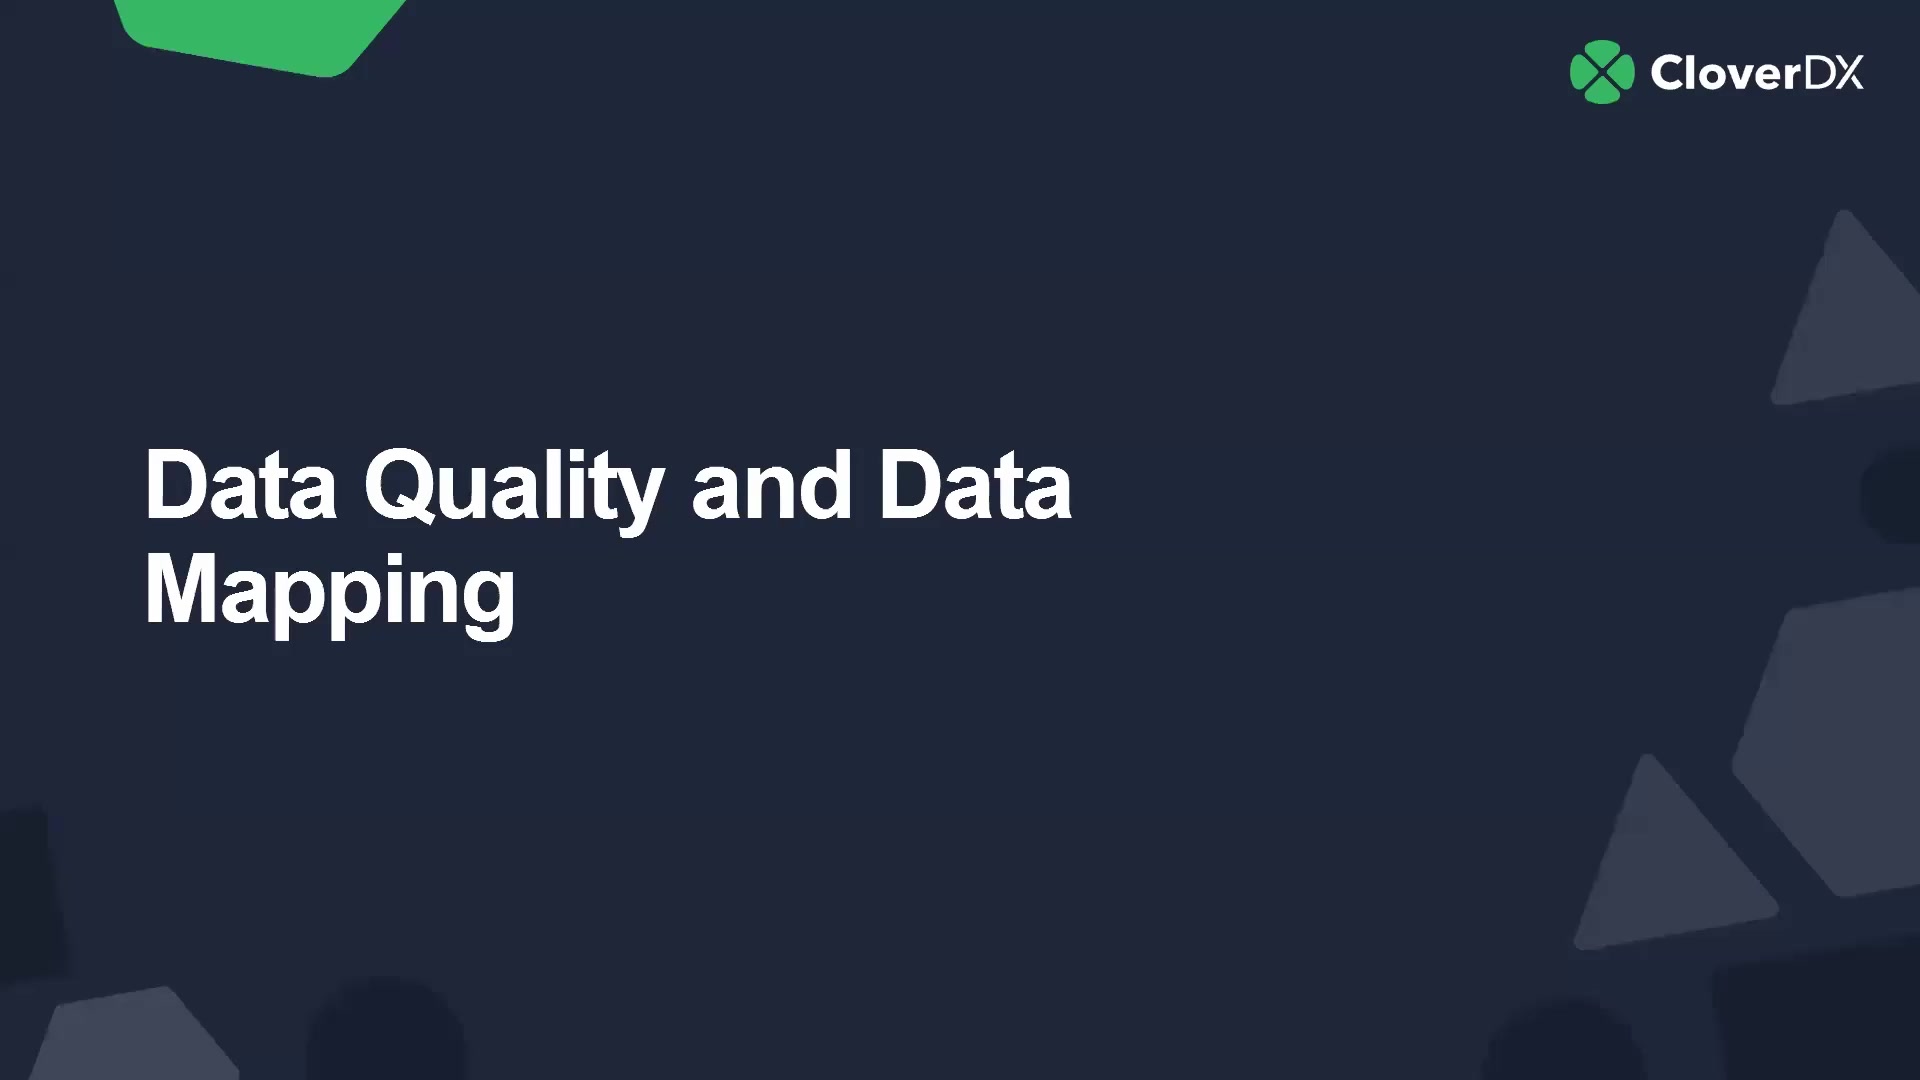 Thumbnail: Data Quality and Mapping